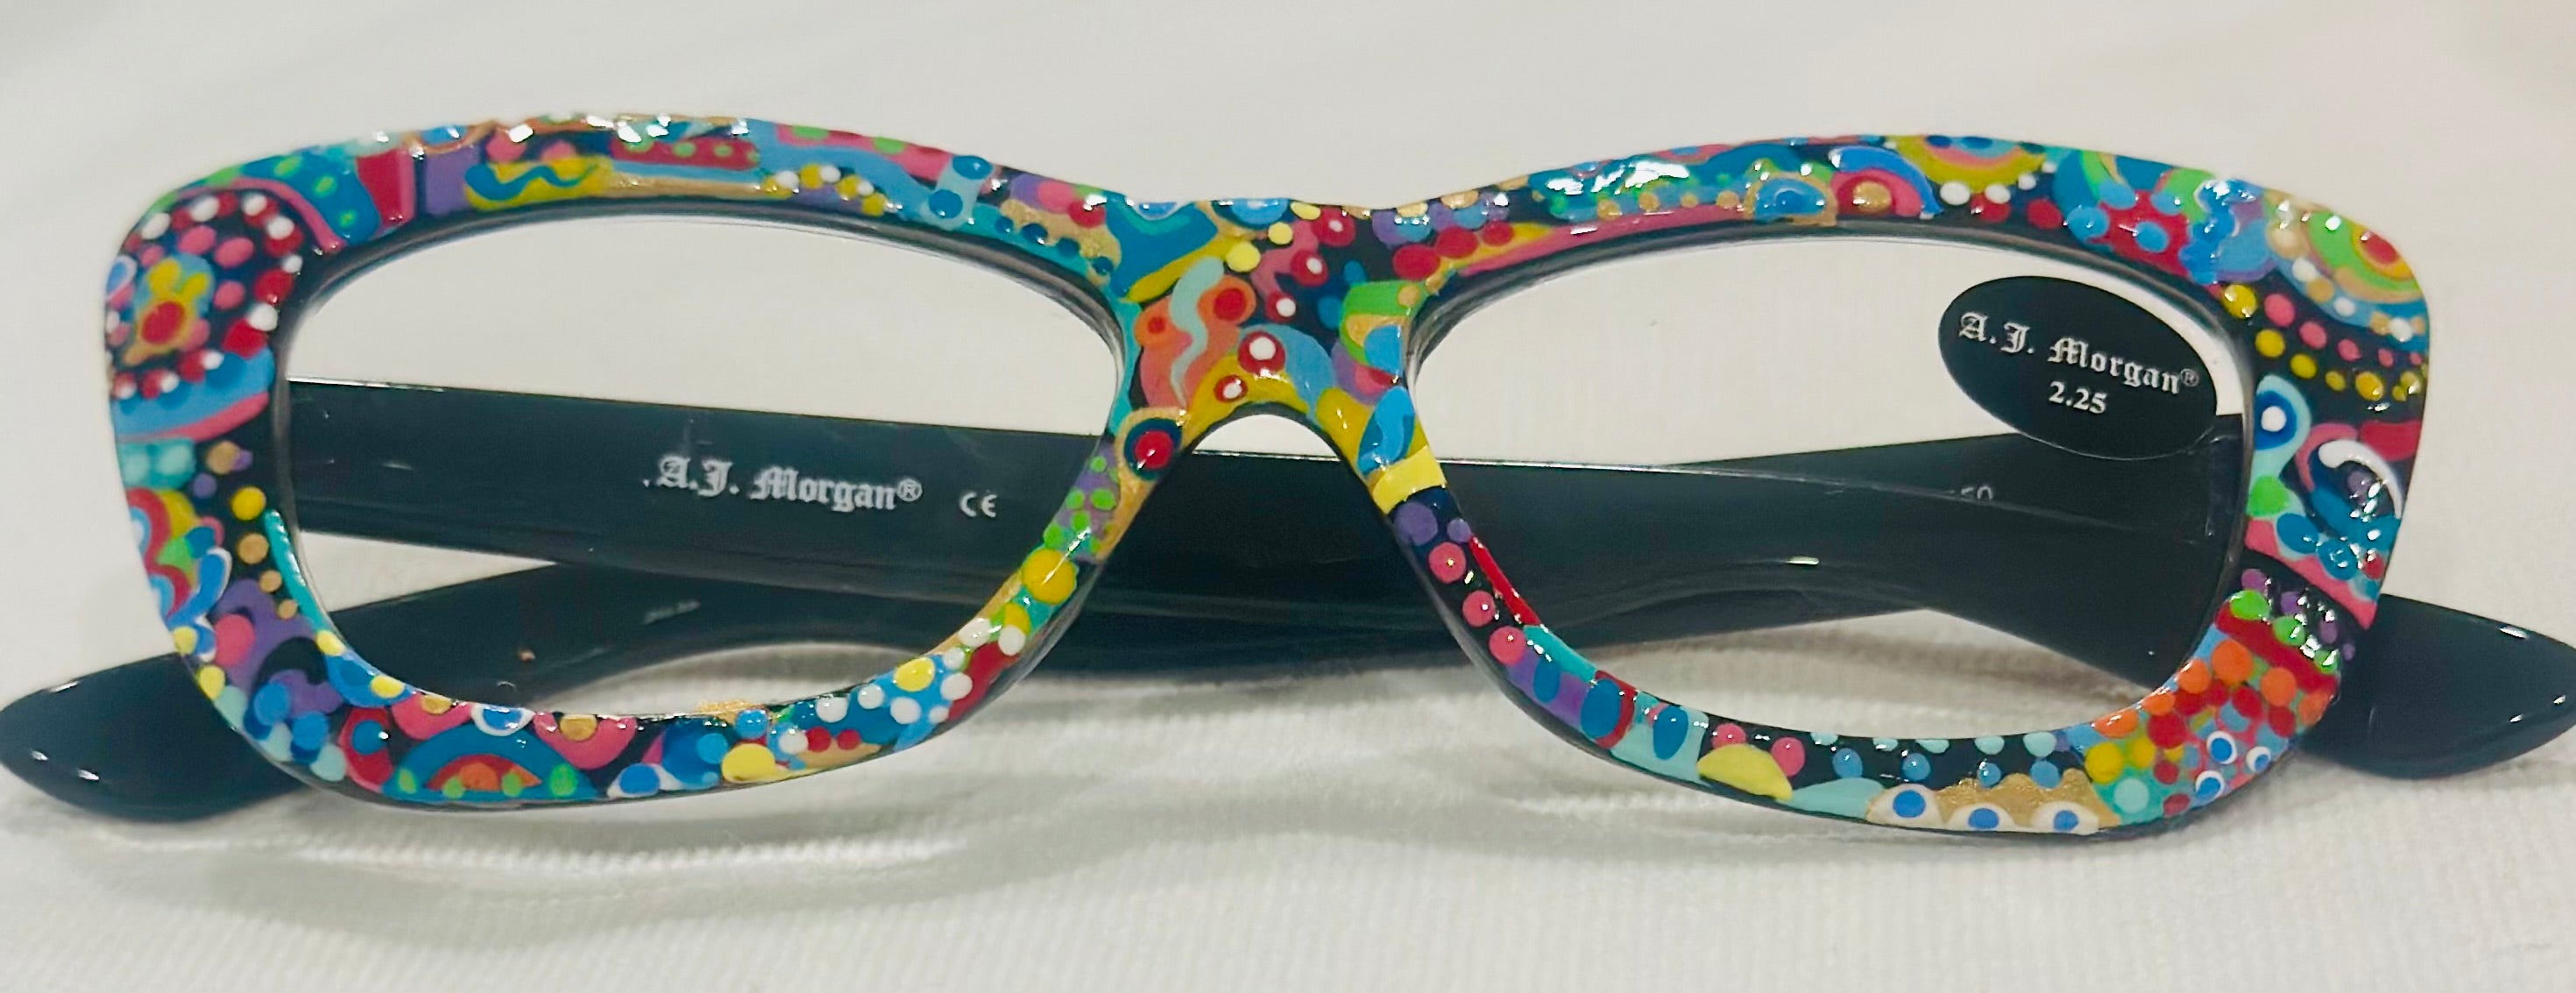 Hand Painted Cat Eye Reading Glasses 2.25 magnification